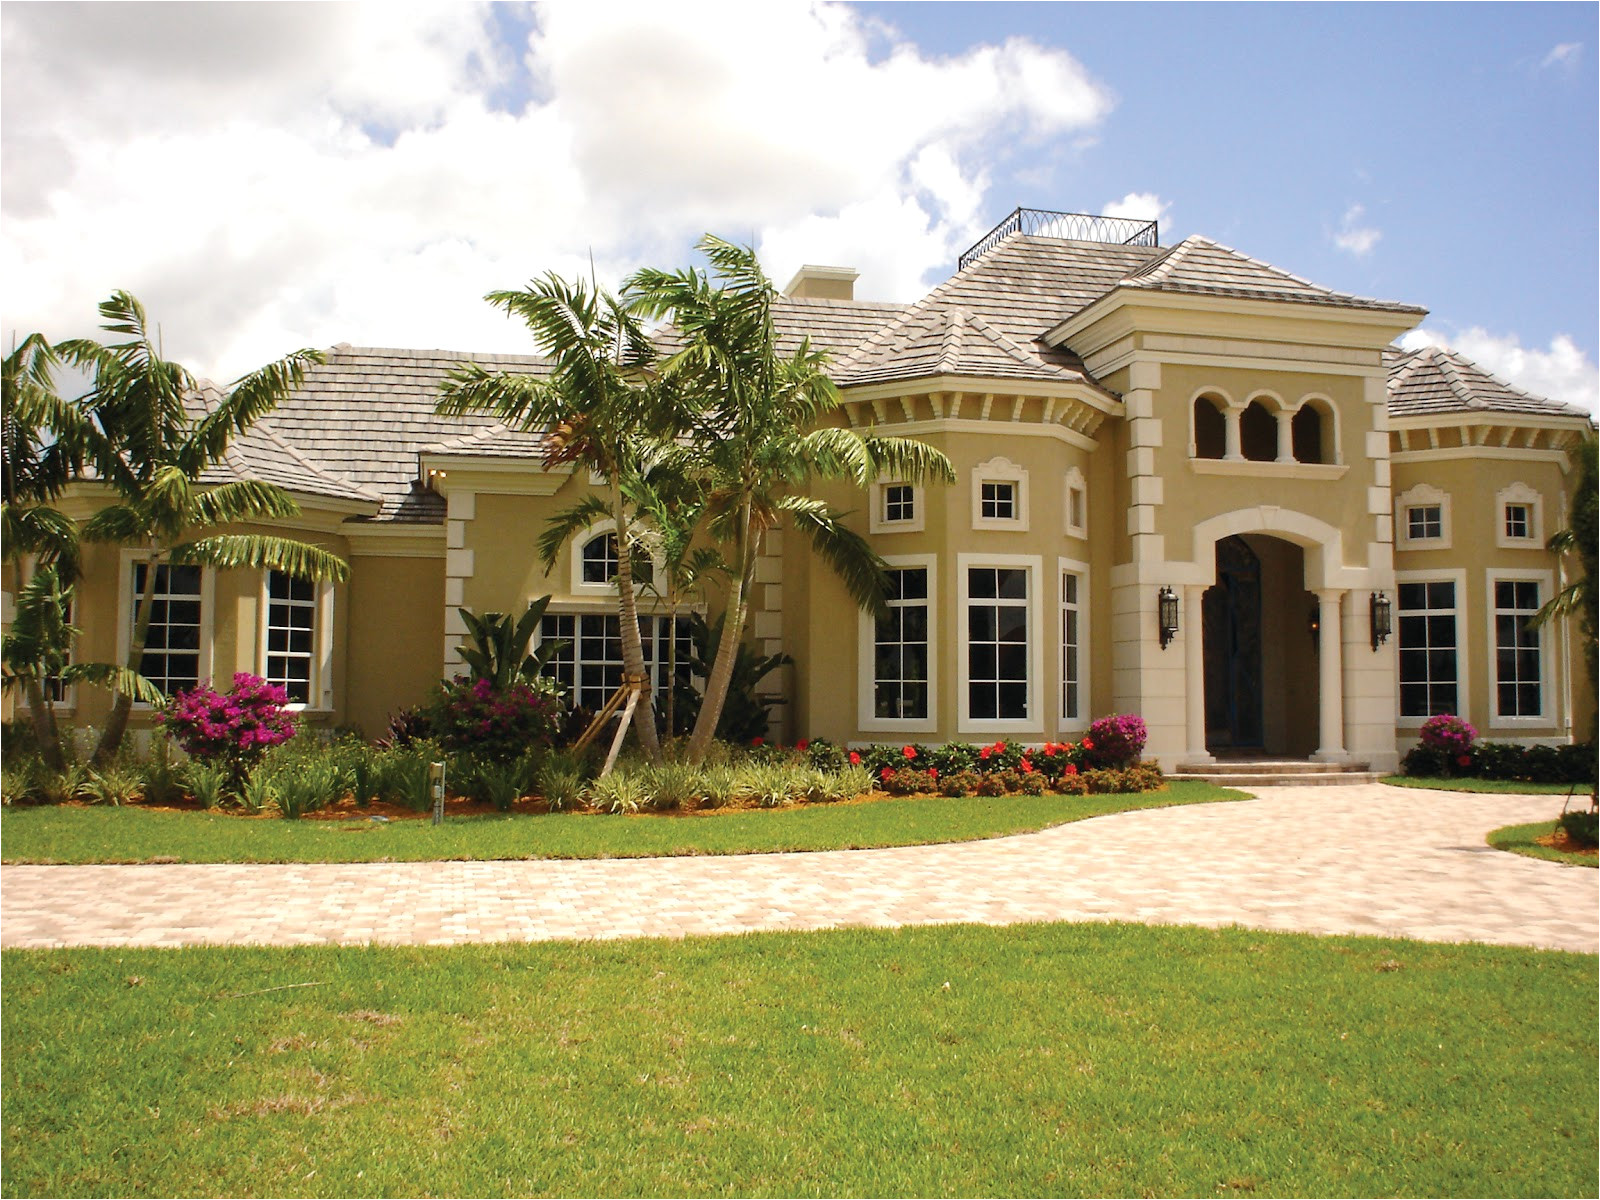 south florida luxury home plans